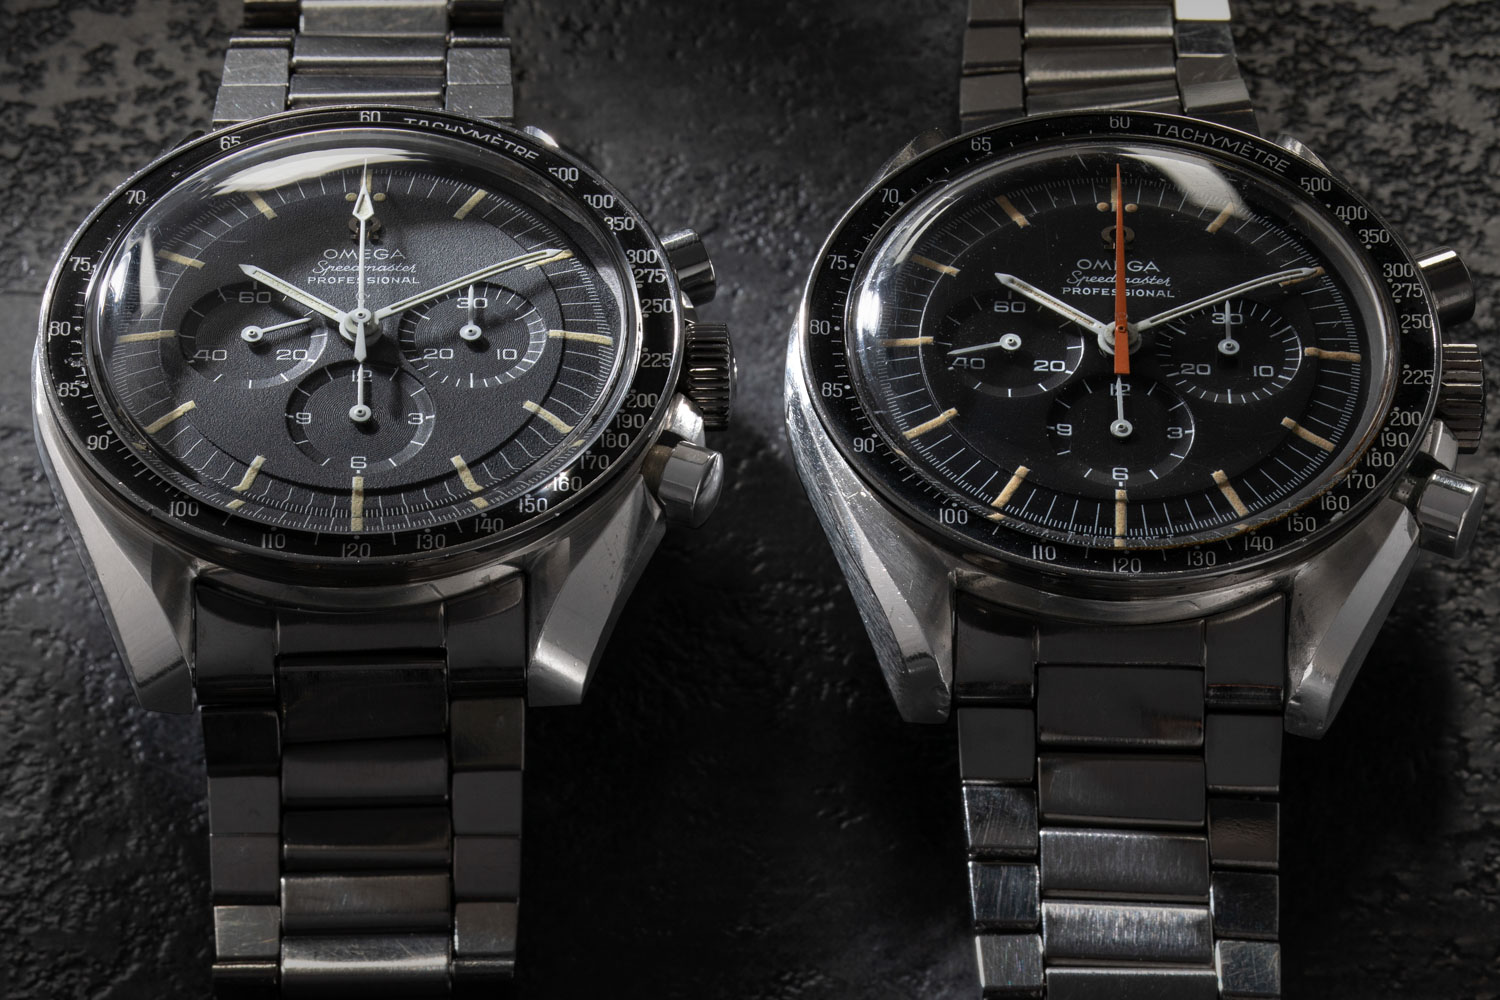 Here is a 145.012-67 case from an Ultraman Speedmaster (R) where you can clearly see the difference in bevels on the lugs of the ref. ST 105.012-66 (L) with a Le Centrale Boites case (©Revolution)